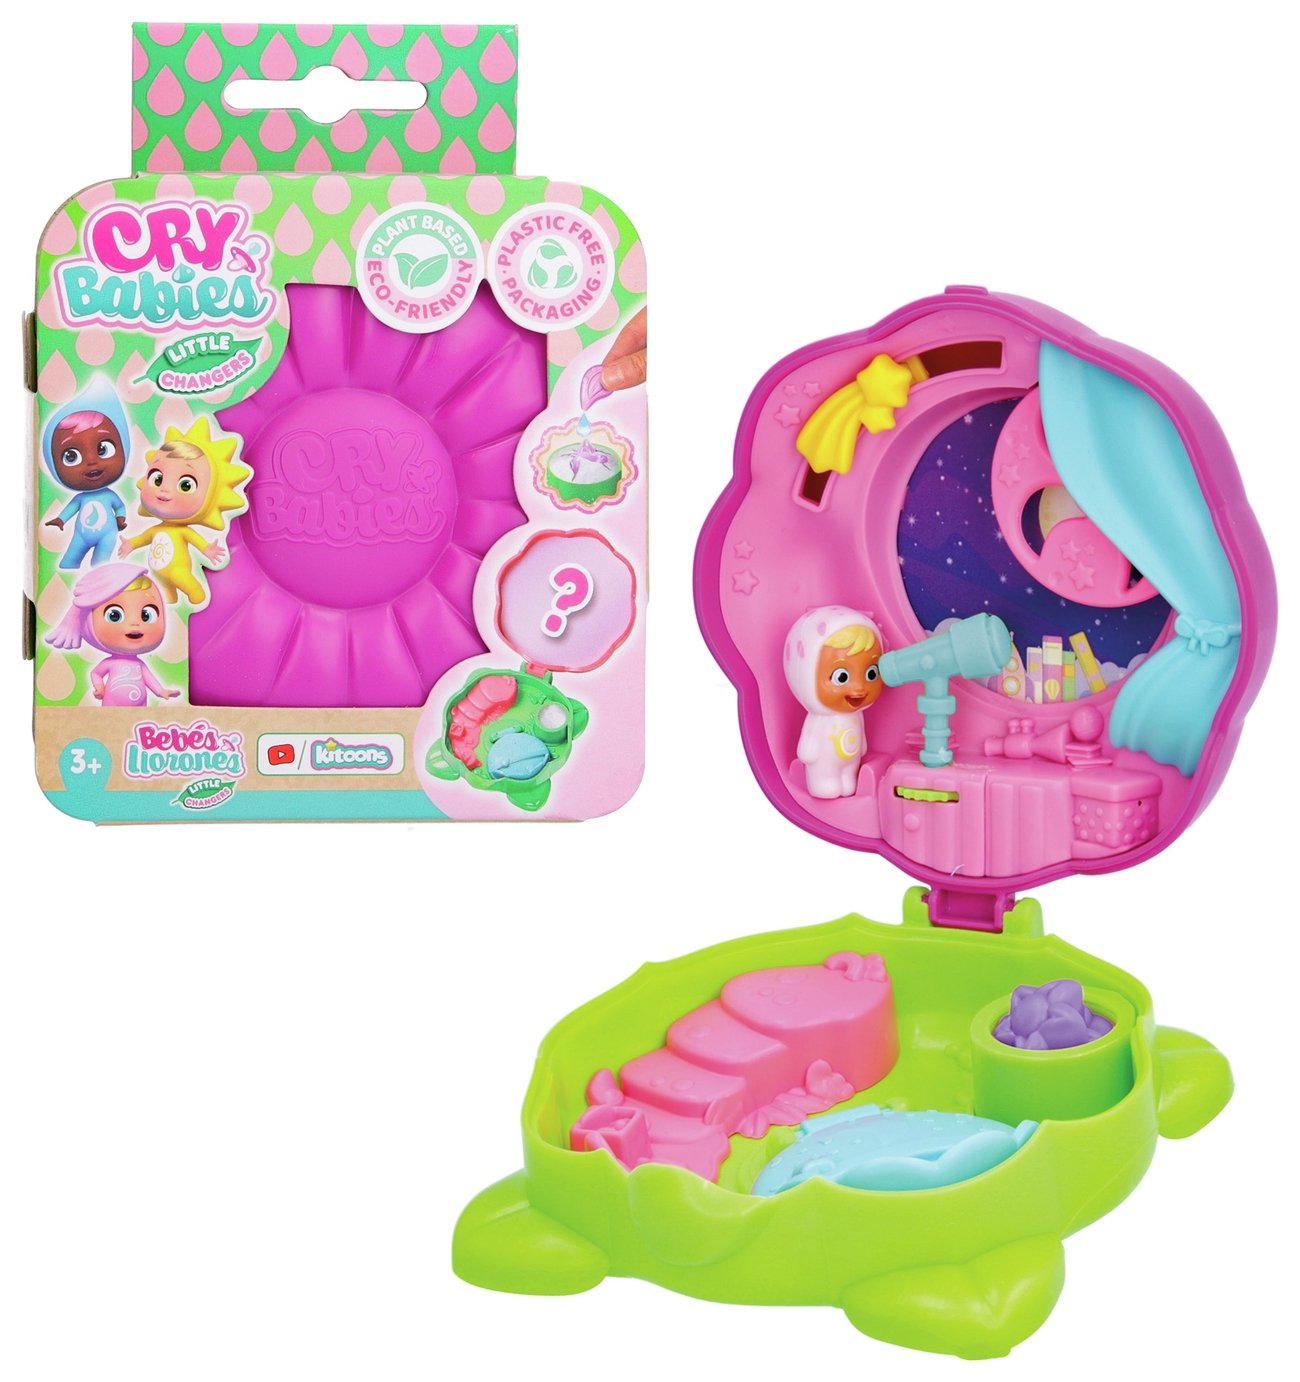 Cry Babies Little Changers Micro Doll Playset - Moon - 5cm